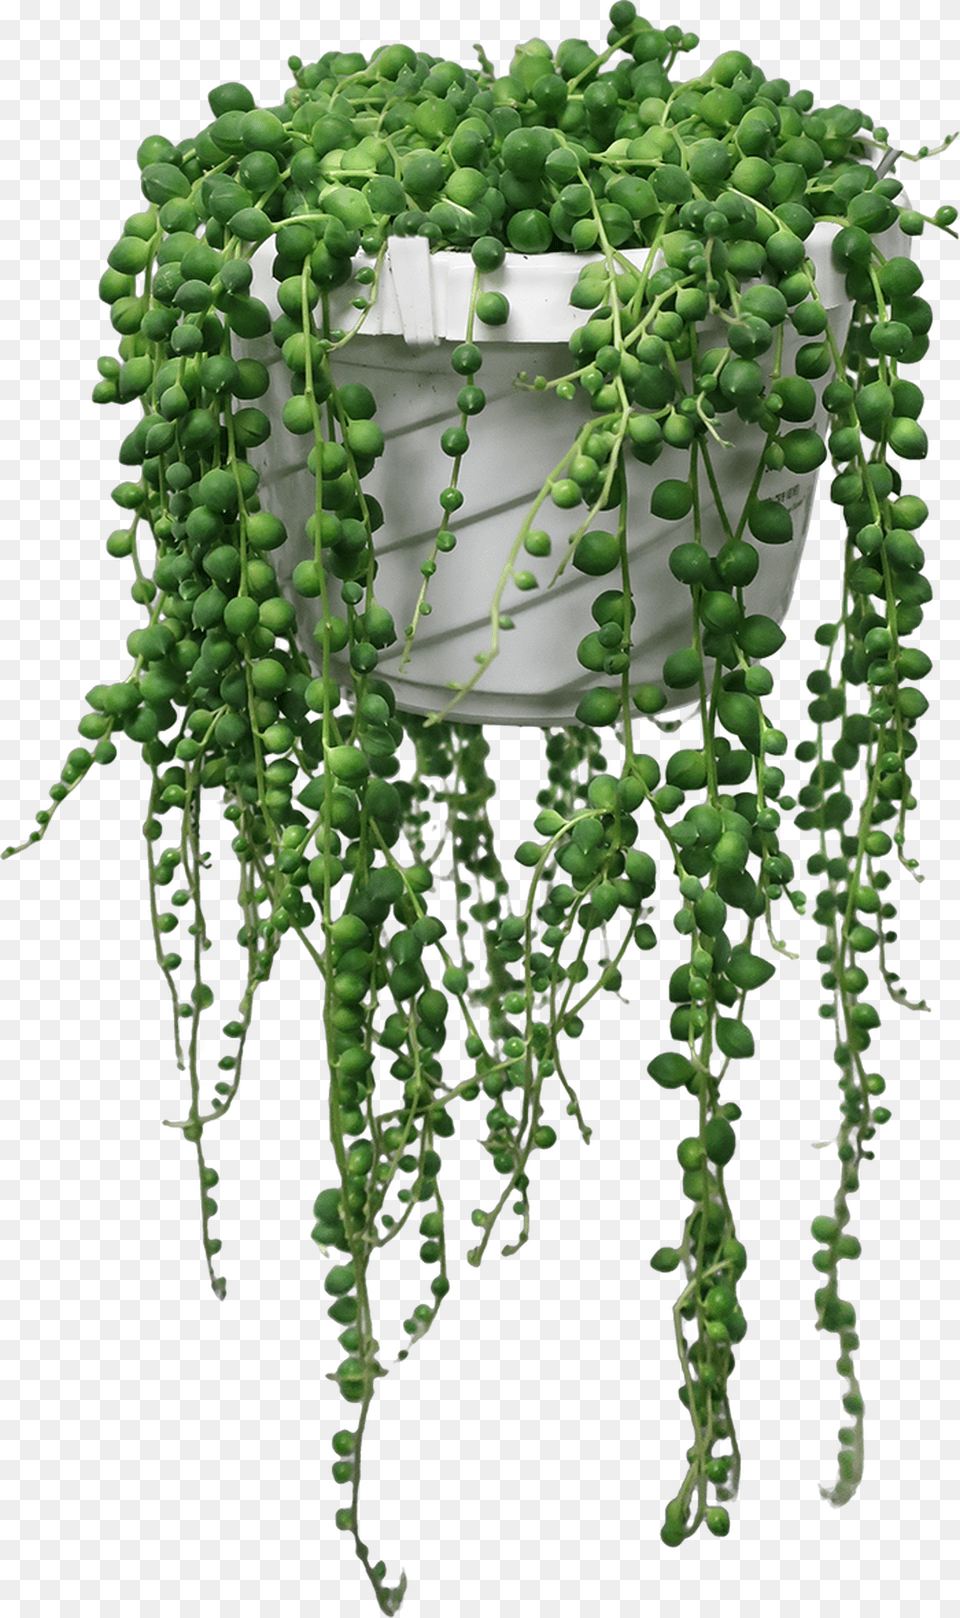 String Of Pearlsbeads In A Hanging Basket 6quot Pearl Plant, Vine, Food, Produce Png